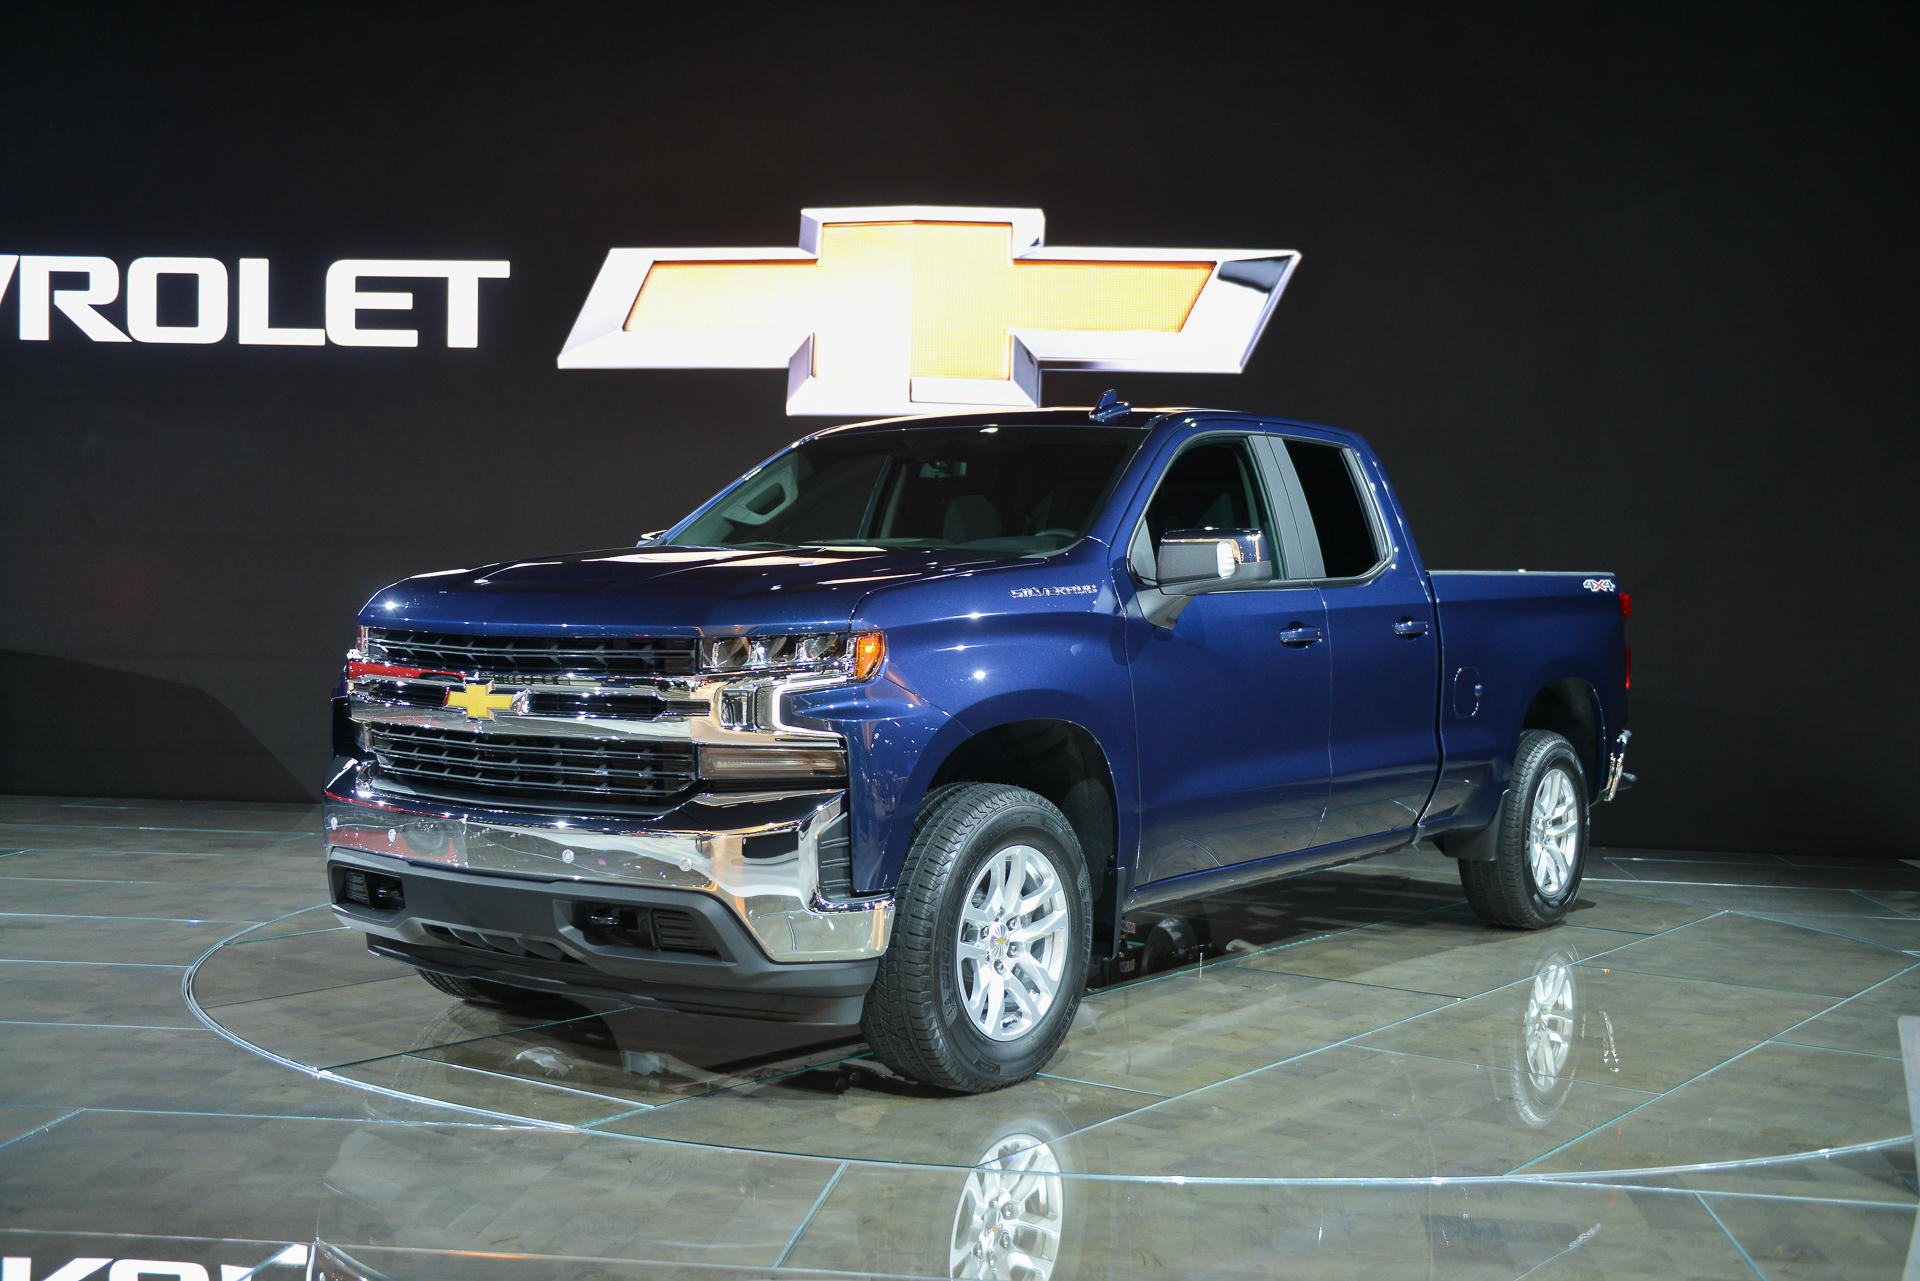 New 2019 Chevy Silverado pickup: planned for all 